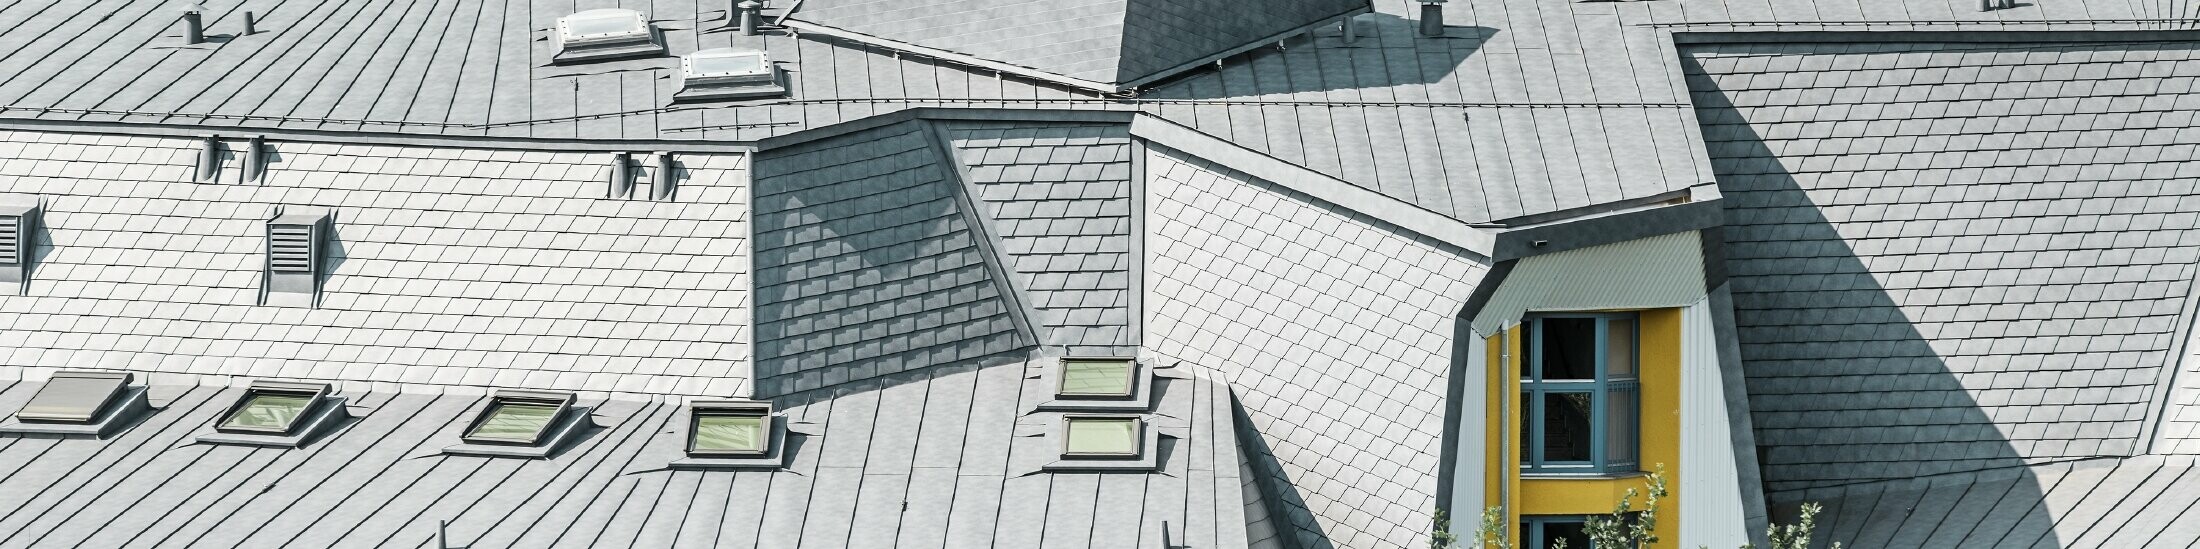 renovated roof with various roof windows, detail, aluminium roof made of Prefalz and PREFA shingles